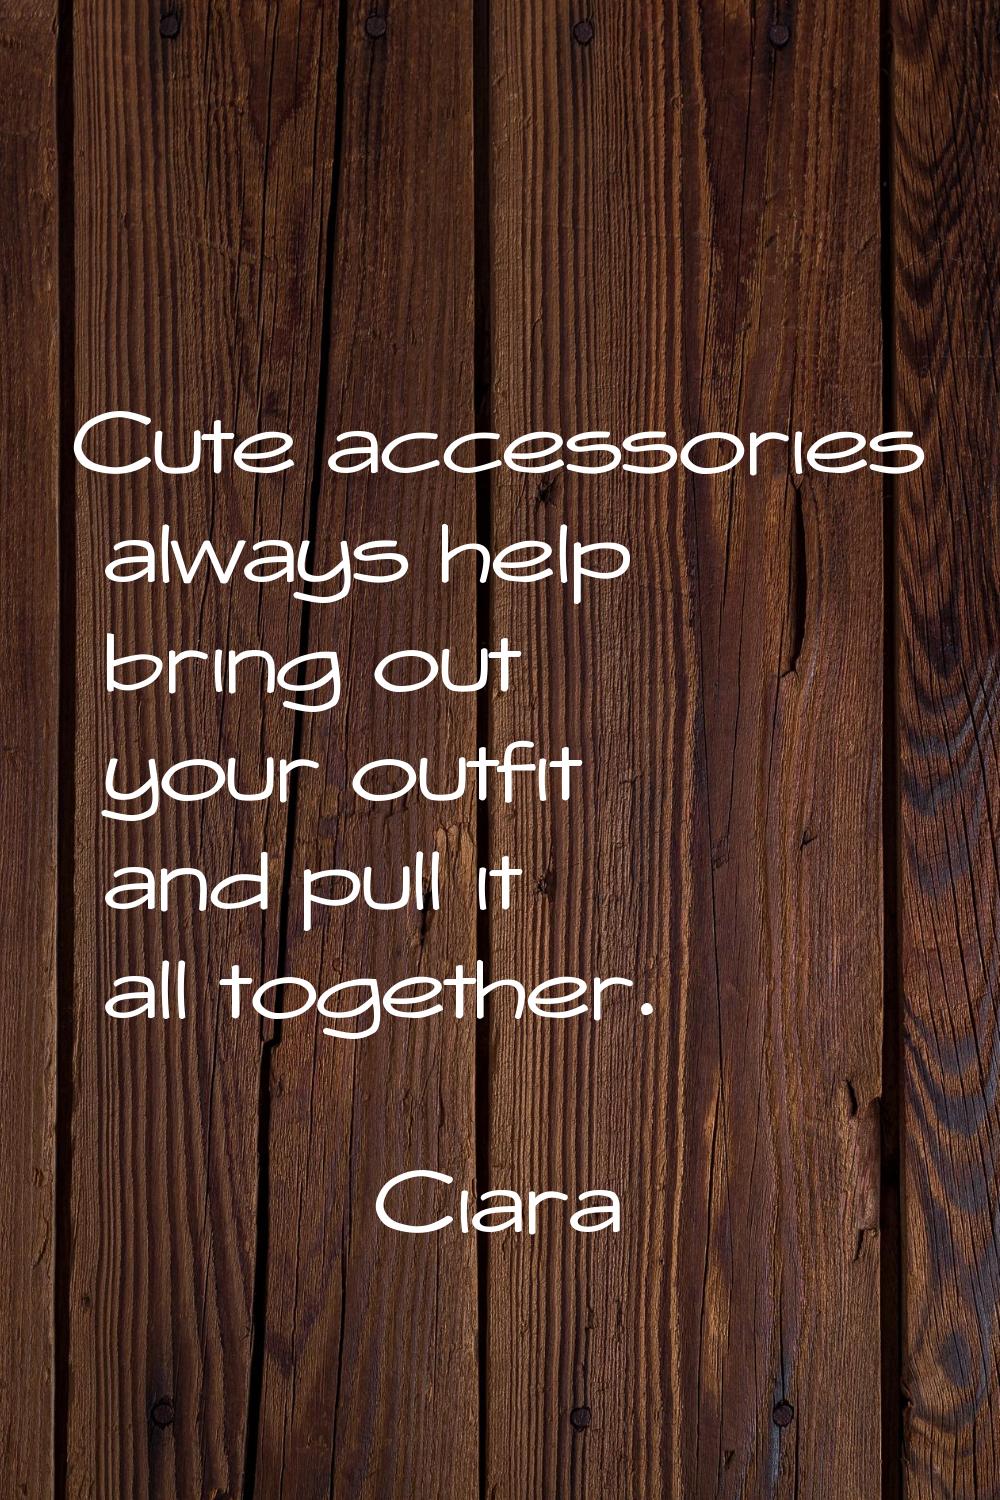 Cute accessories always help bring out your outfit and pull it all together.